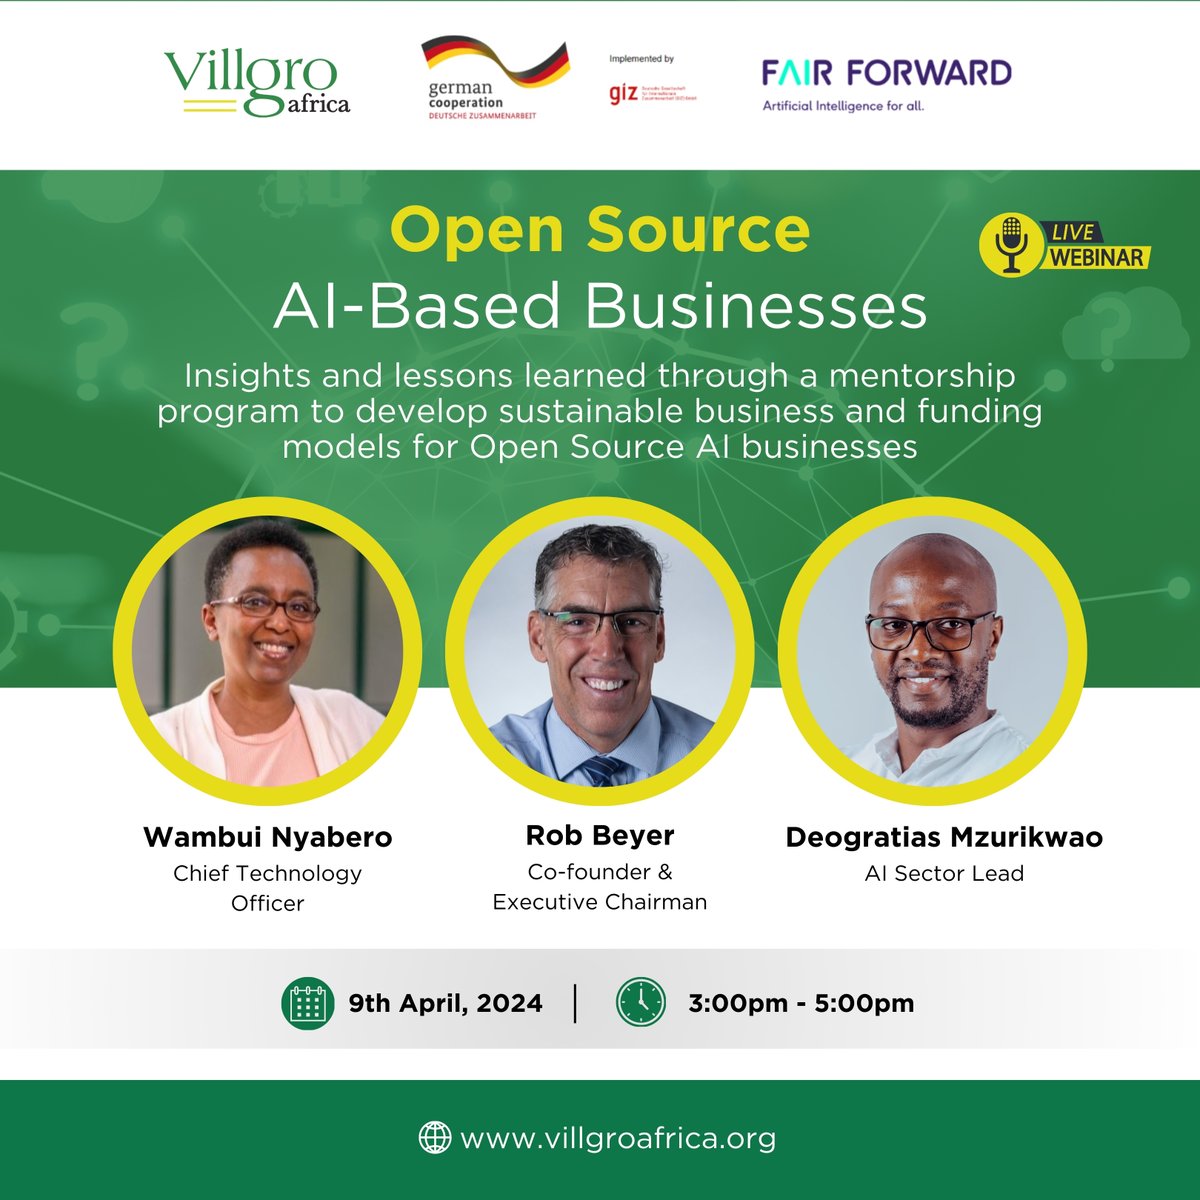 Hear insights and lessons learned from a mentorship program aimed at developing sustainable business and funding models for open-source AI businesses. This webinar will take place on Tuesday, April 9th from 3 pm - 5 pm EAT. We hope to see you there! zoom.us/j/91713091434?…